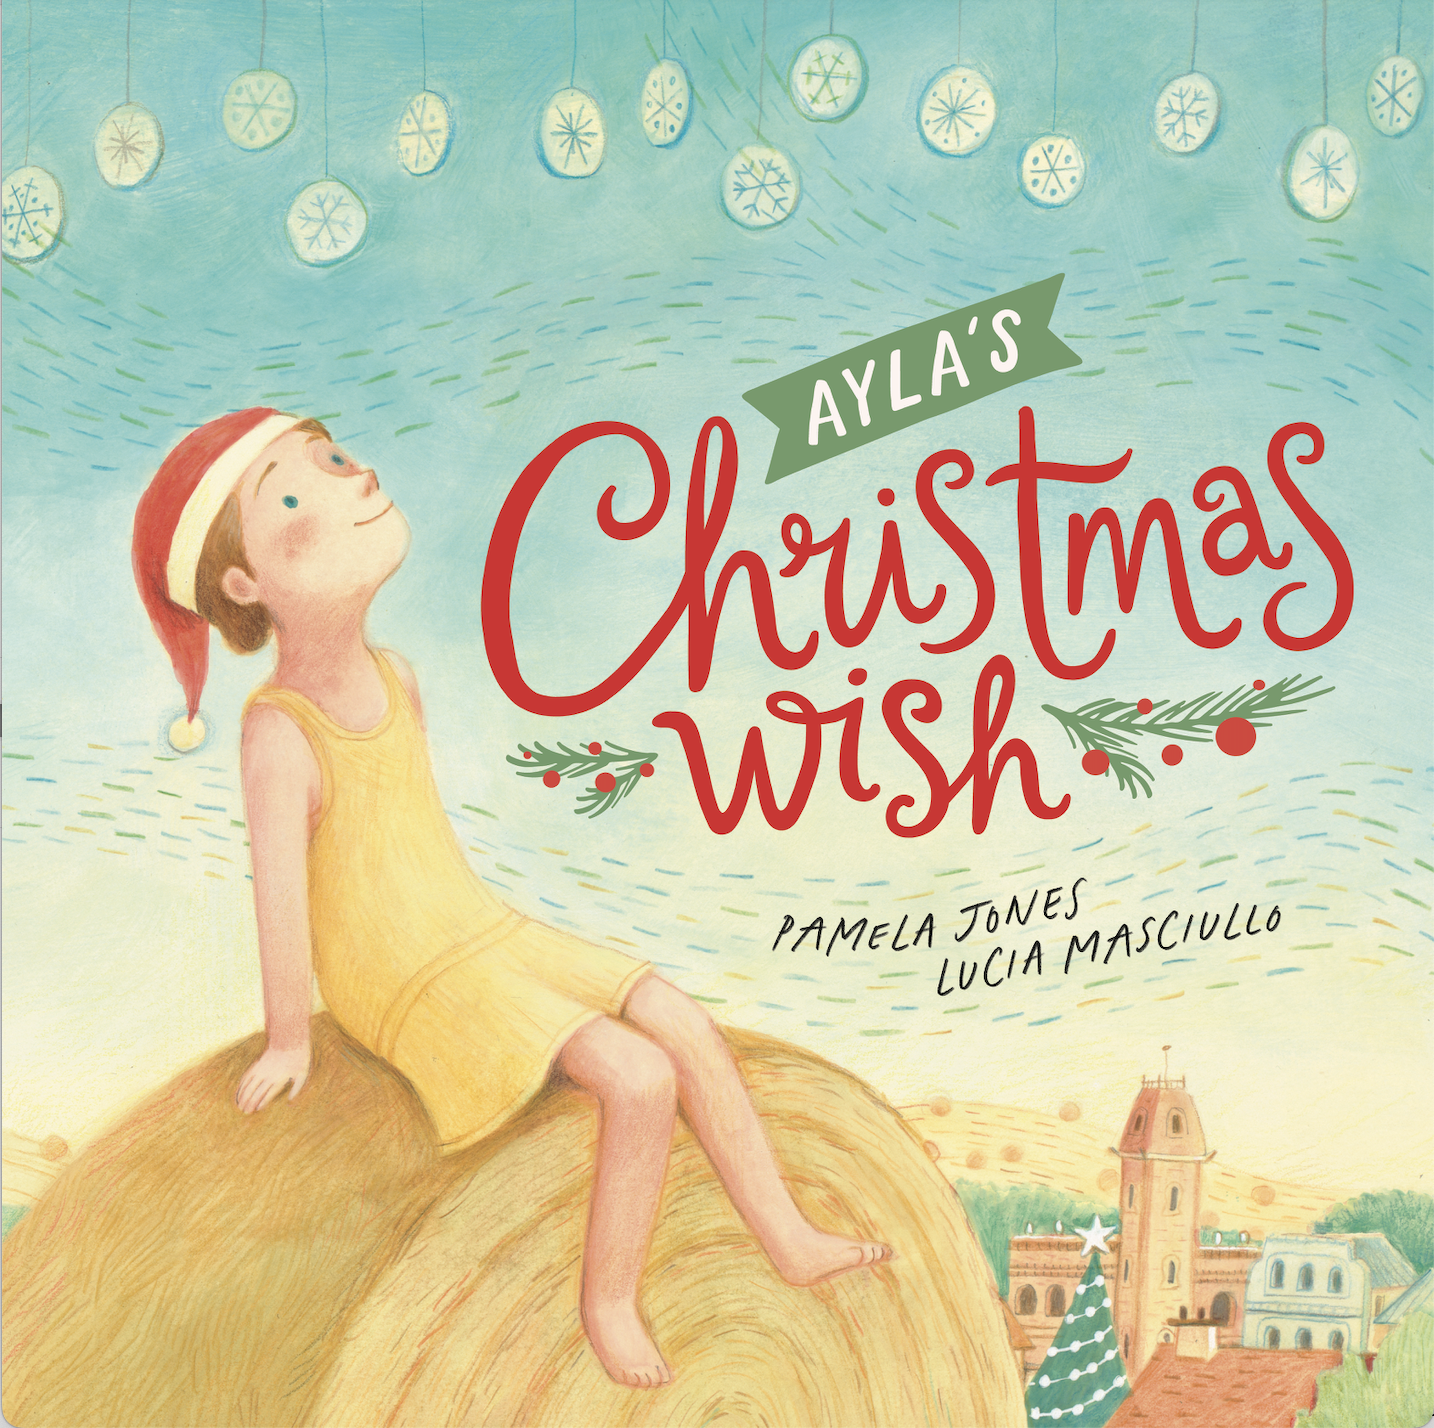 Ayla's Christmas Wish by Pamela Jones and Lucia Masciullo – The Book Muse